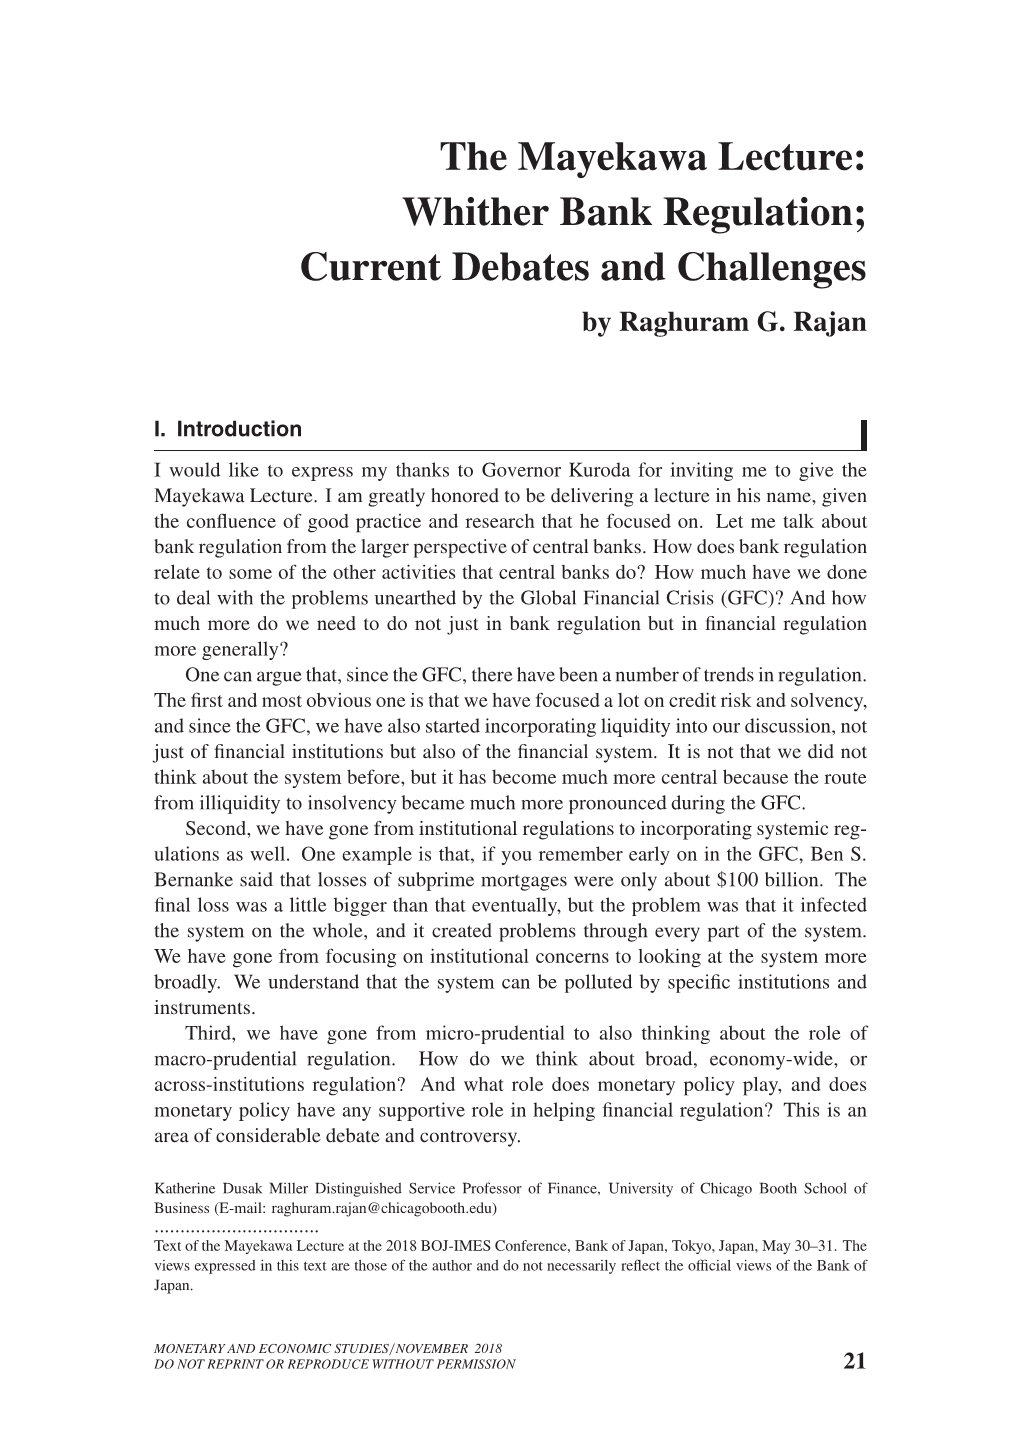 The Mayekawa Lecture: Whither Bank Regulation; Current Debates and Challenges by Raghuram G